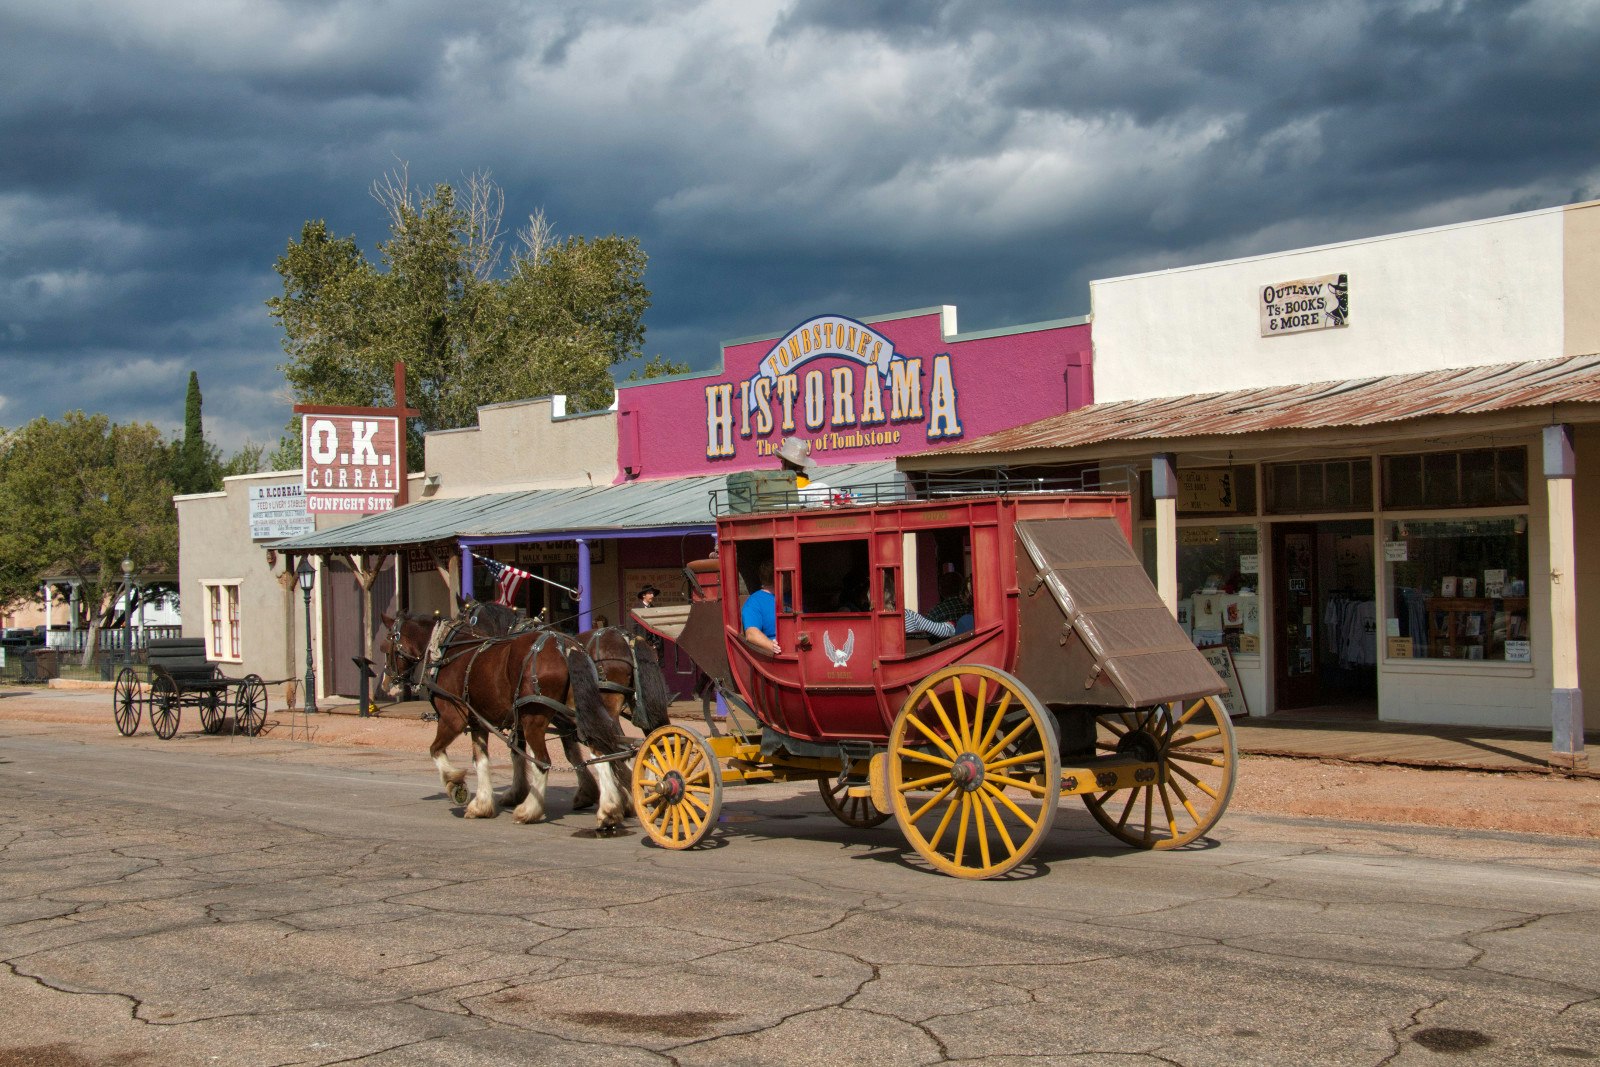 An old stage coach driven by horses goes through the town. There are storefronts behind with Wild West style signs.